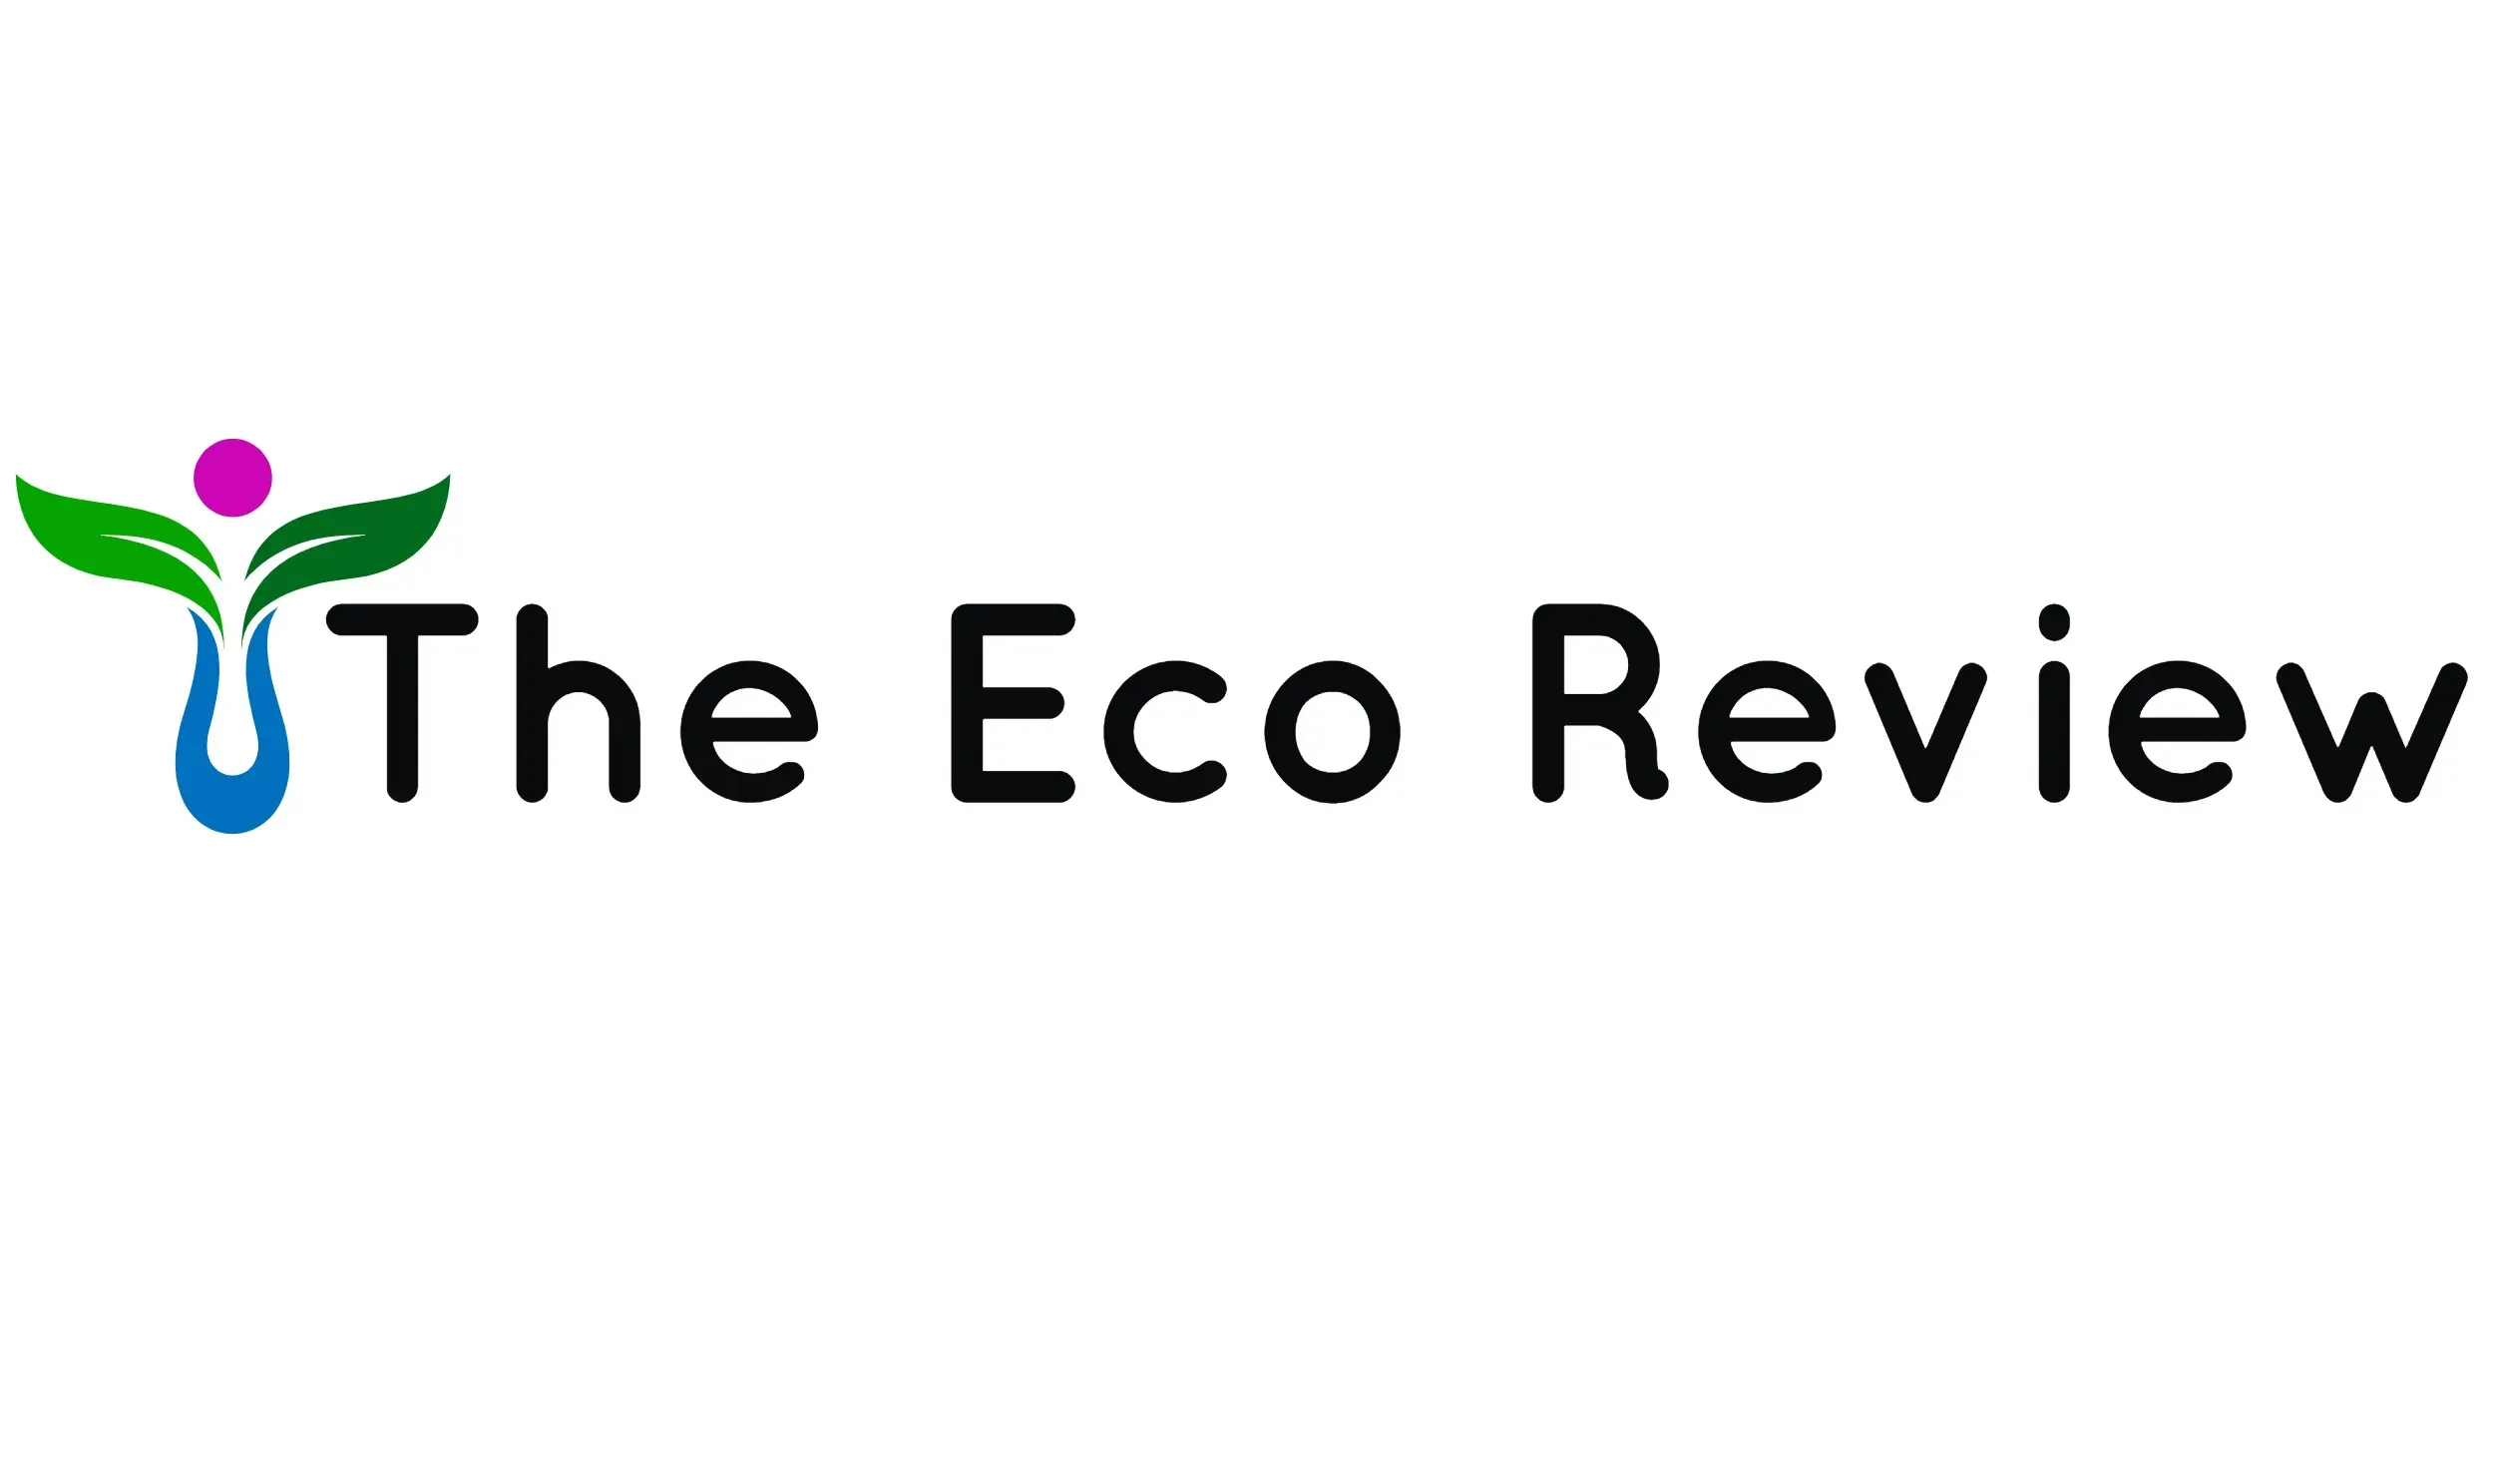 The Eco Review